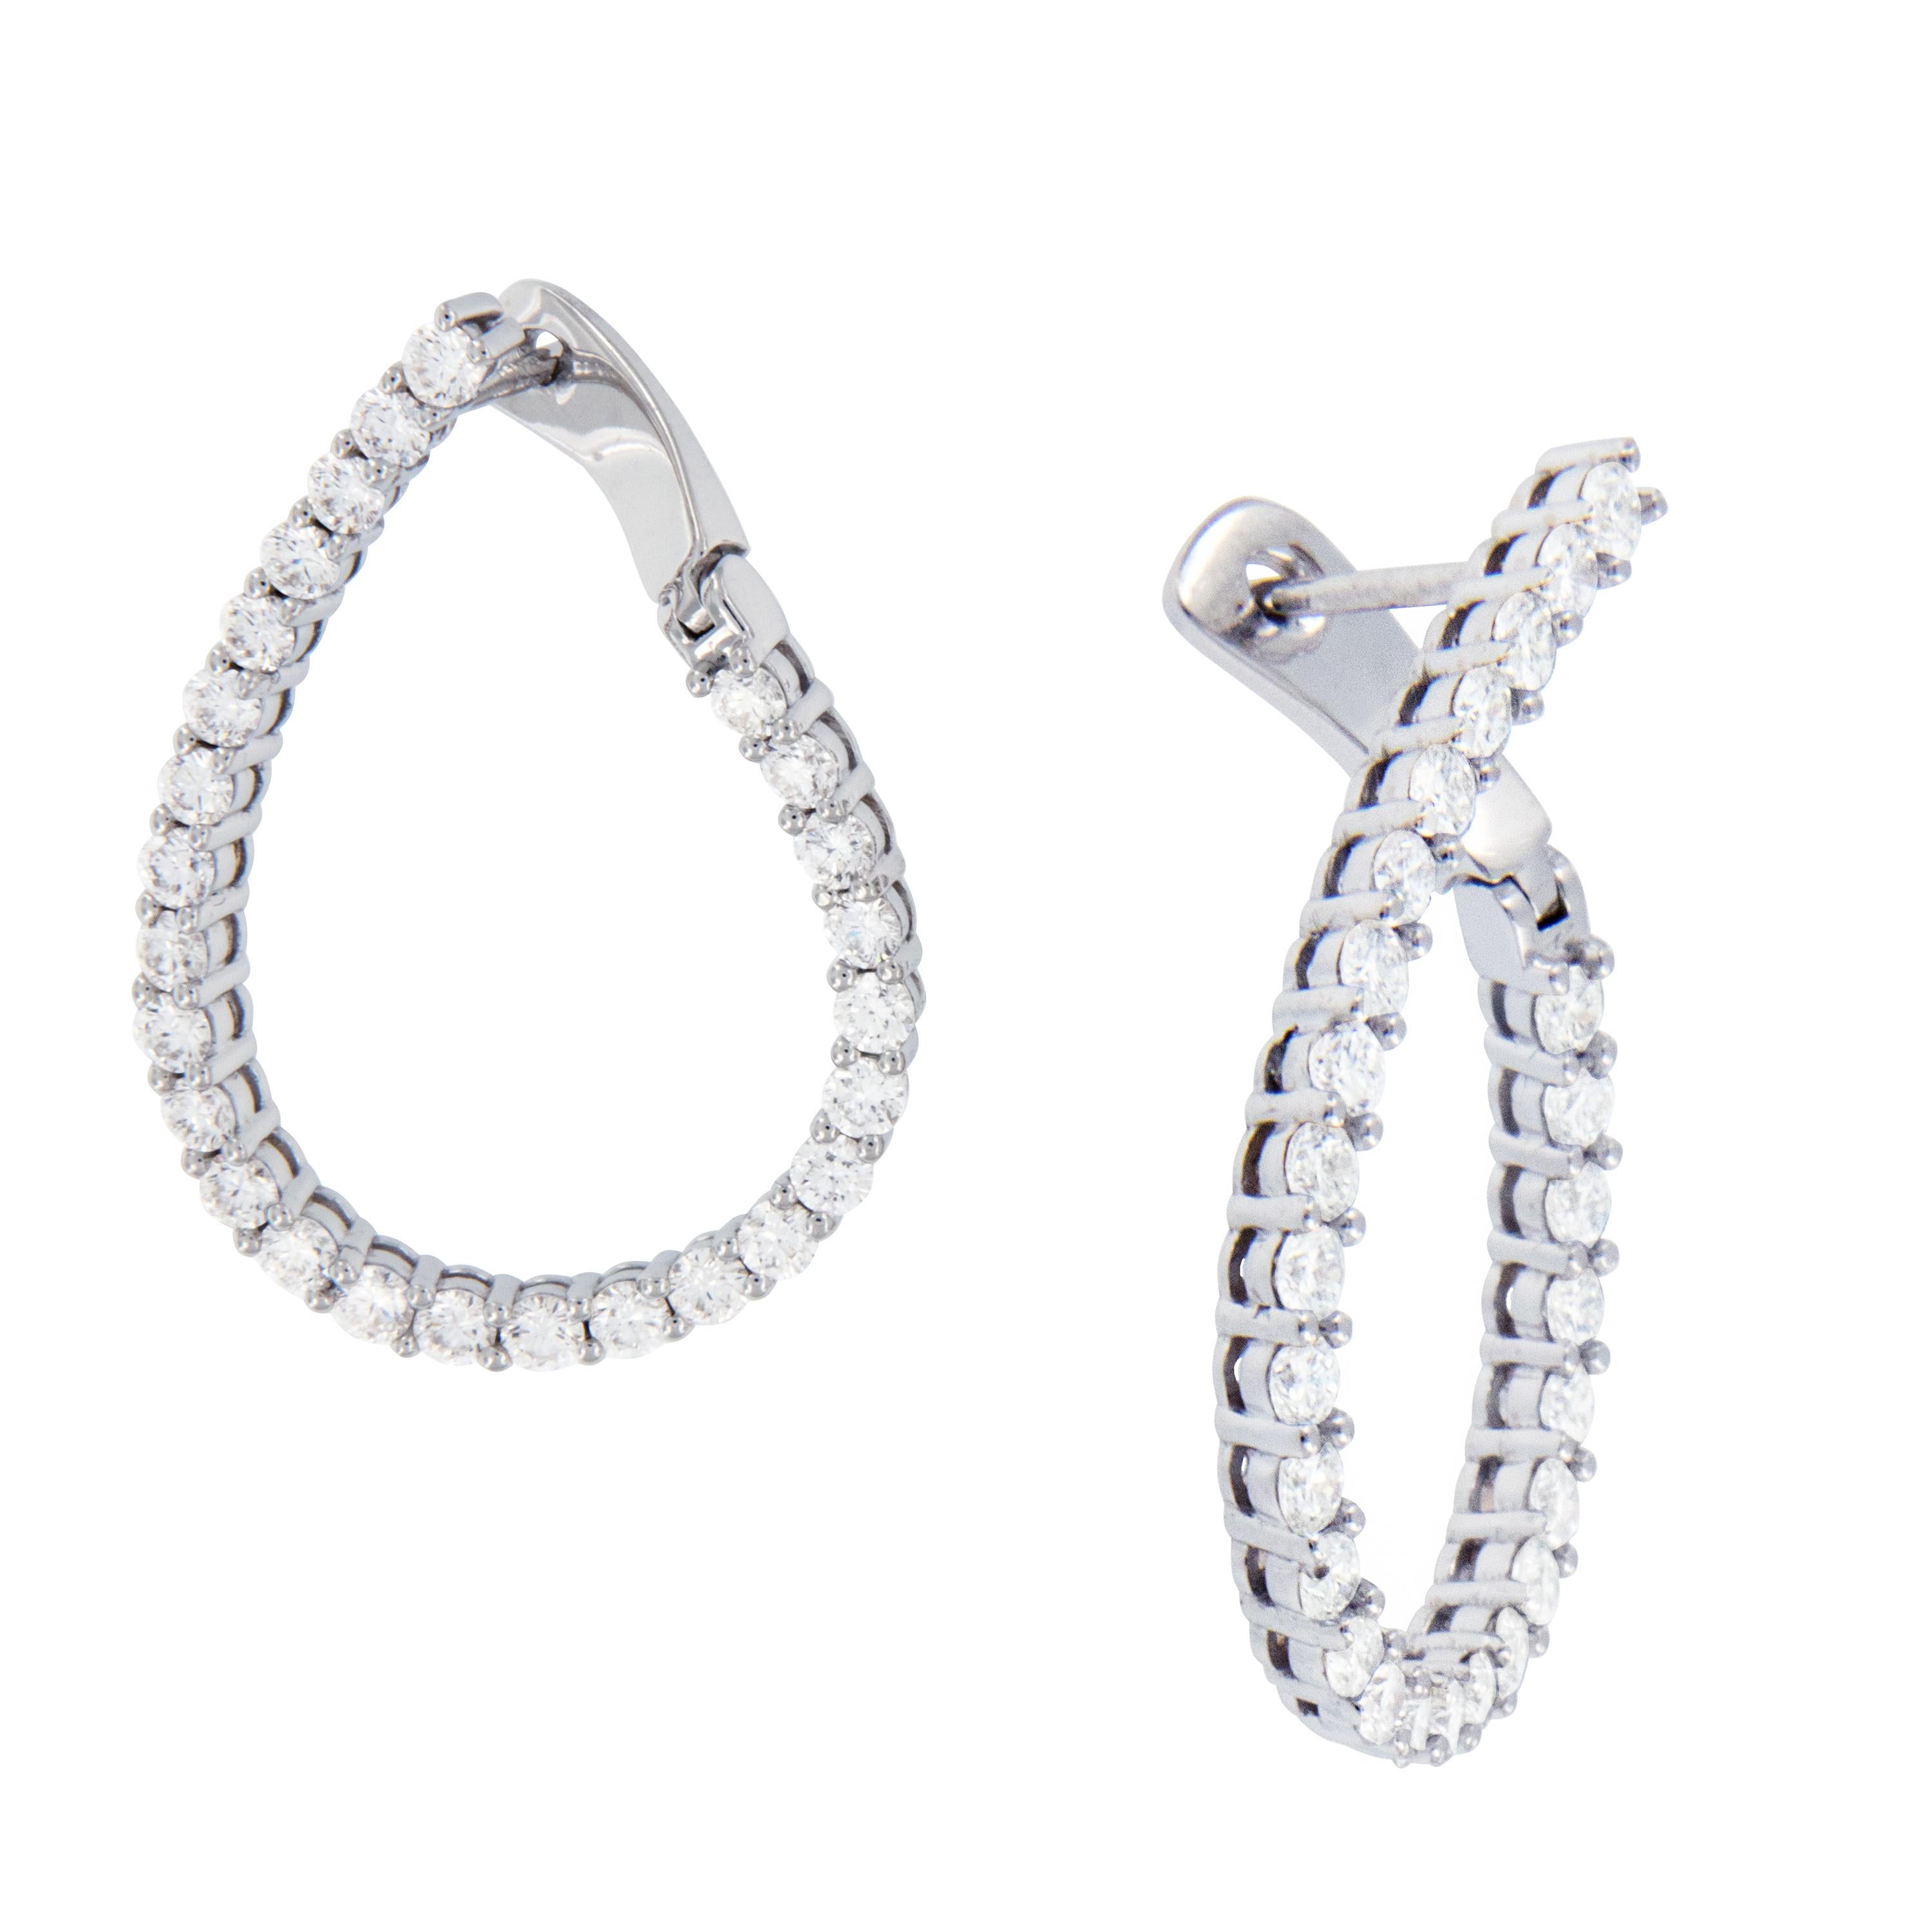 Why be like everyone else when you can stand out with these gorgeous earrings? 18 karat white gold inside / outside diamond hoops in East - West fashion with 2.33 Cttw VS, F-G diamonds are the perfect accessory to any outfit! Earrings have posts &